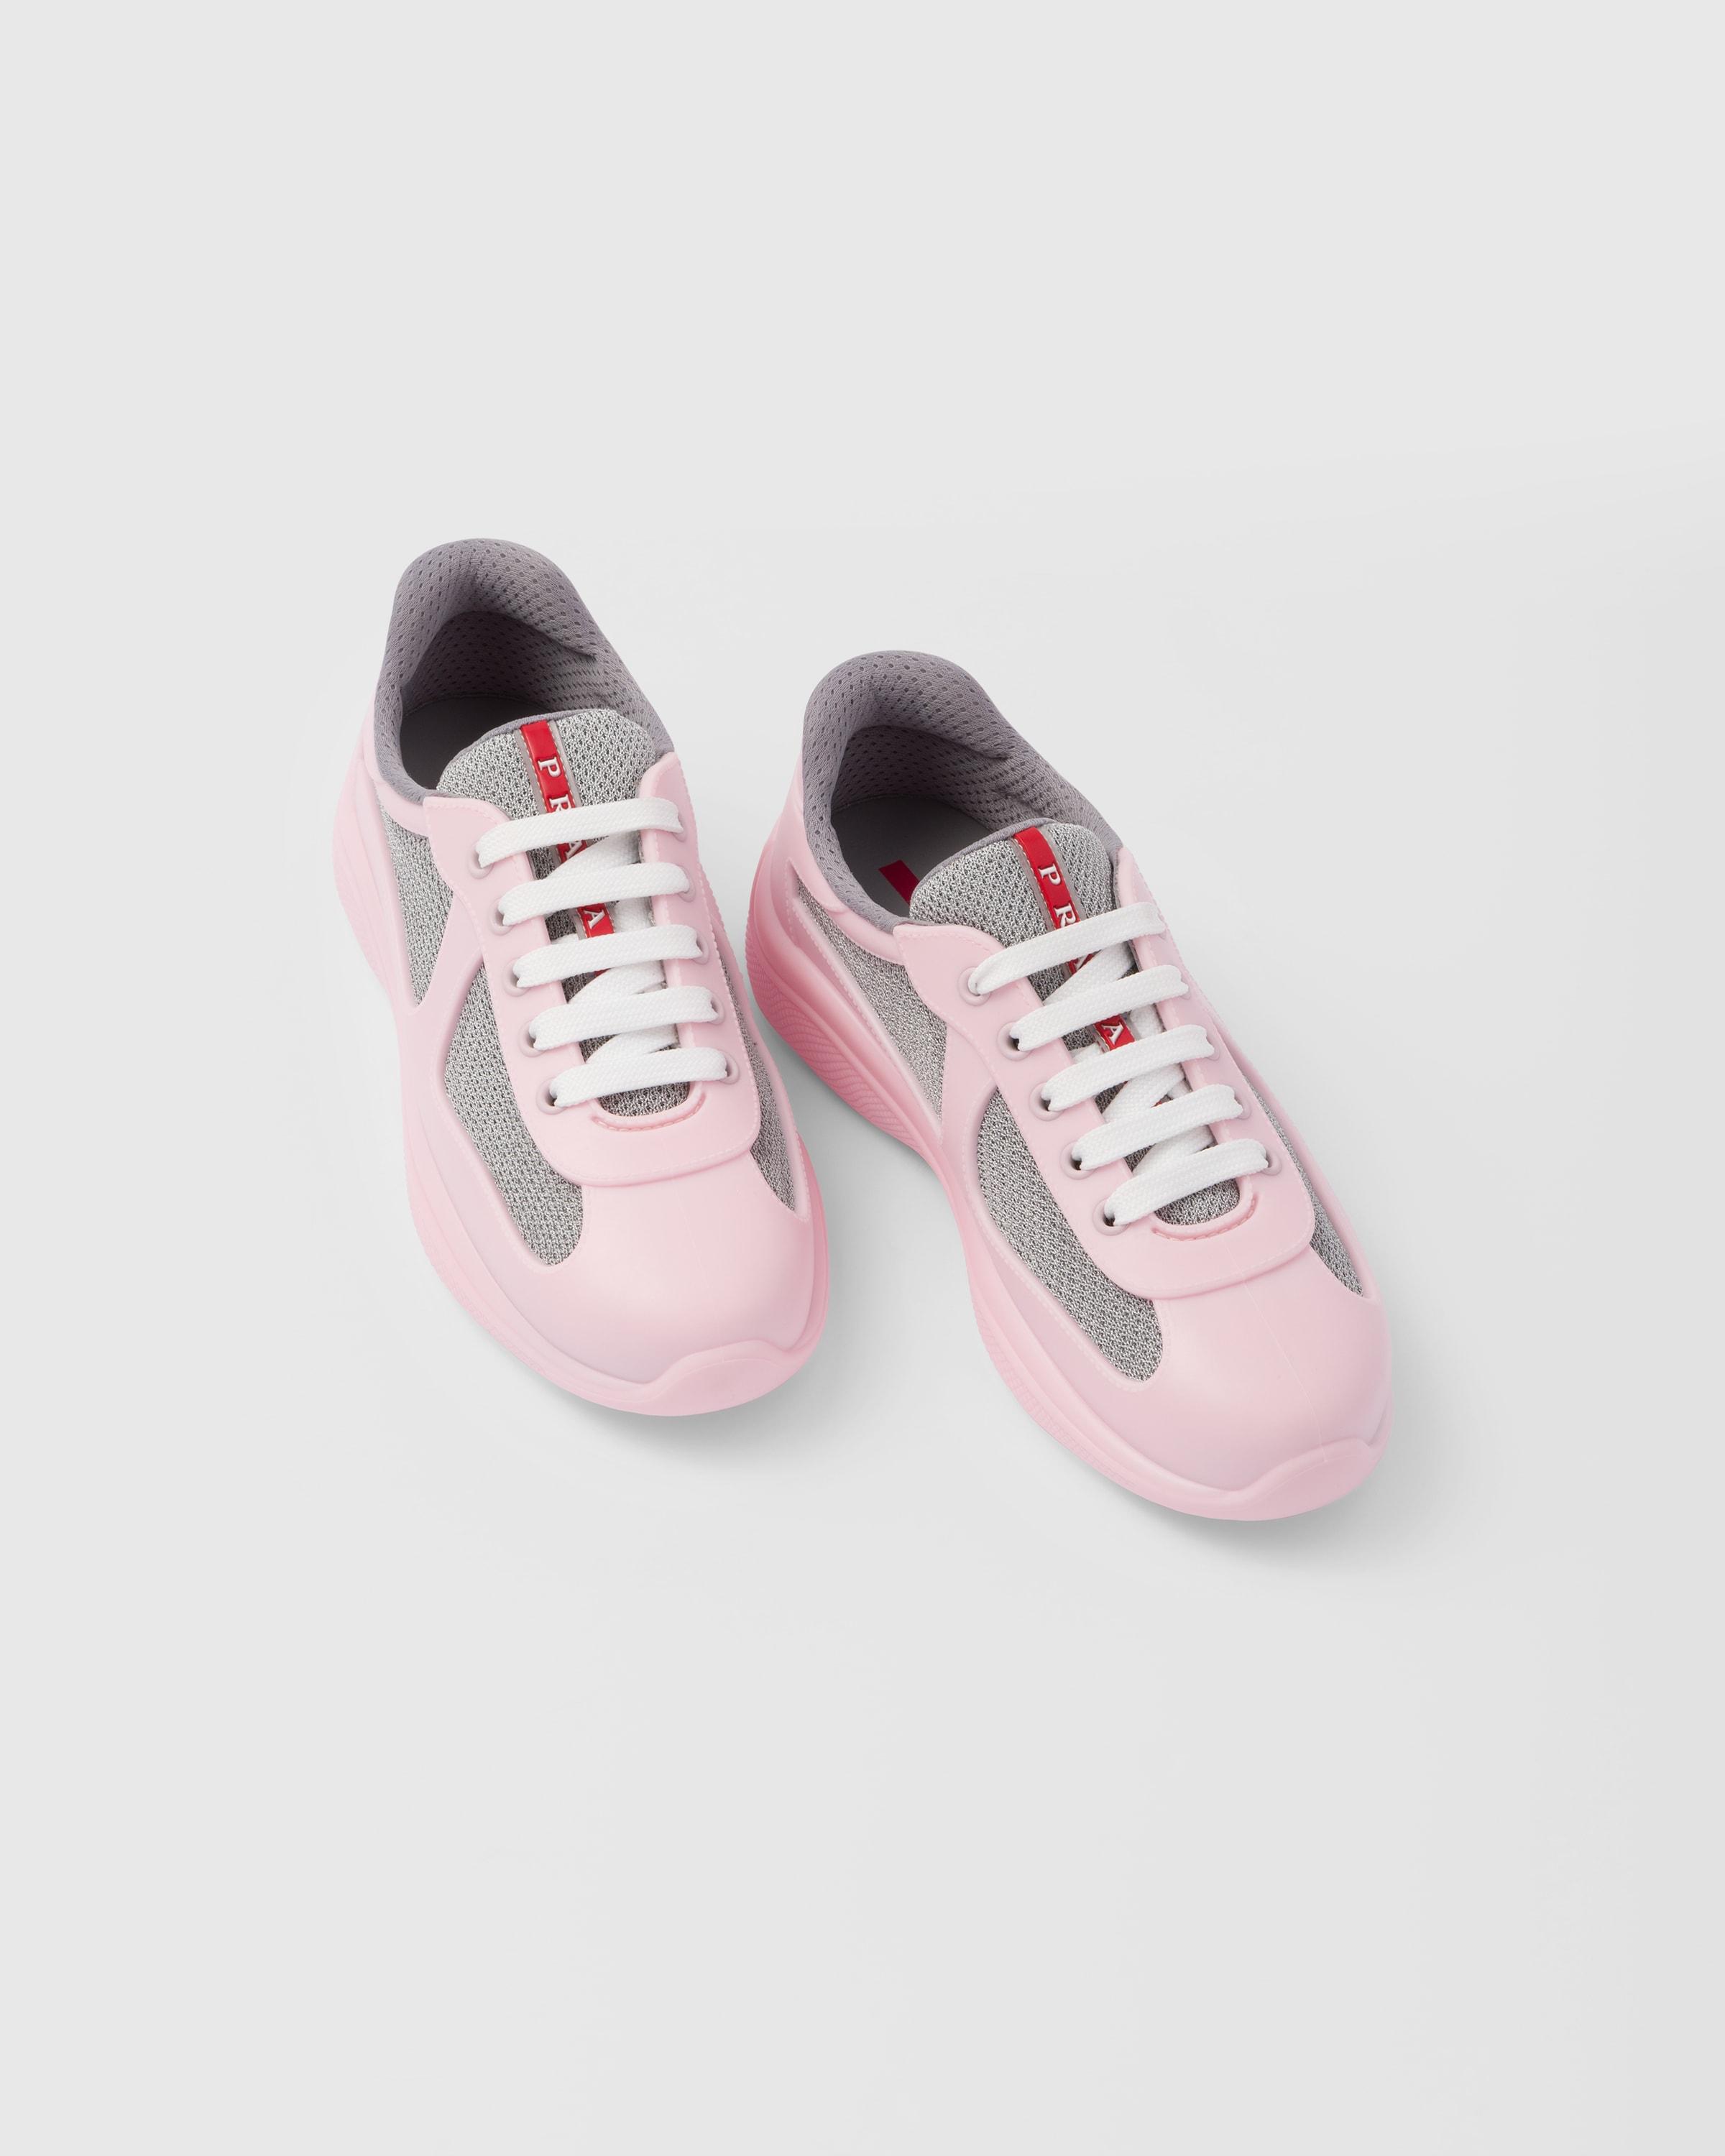 Prada America's Soft Rubber And Bike Fabric Sneakers in Pink | Lyst